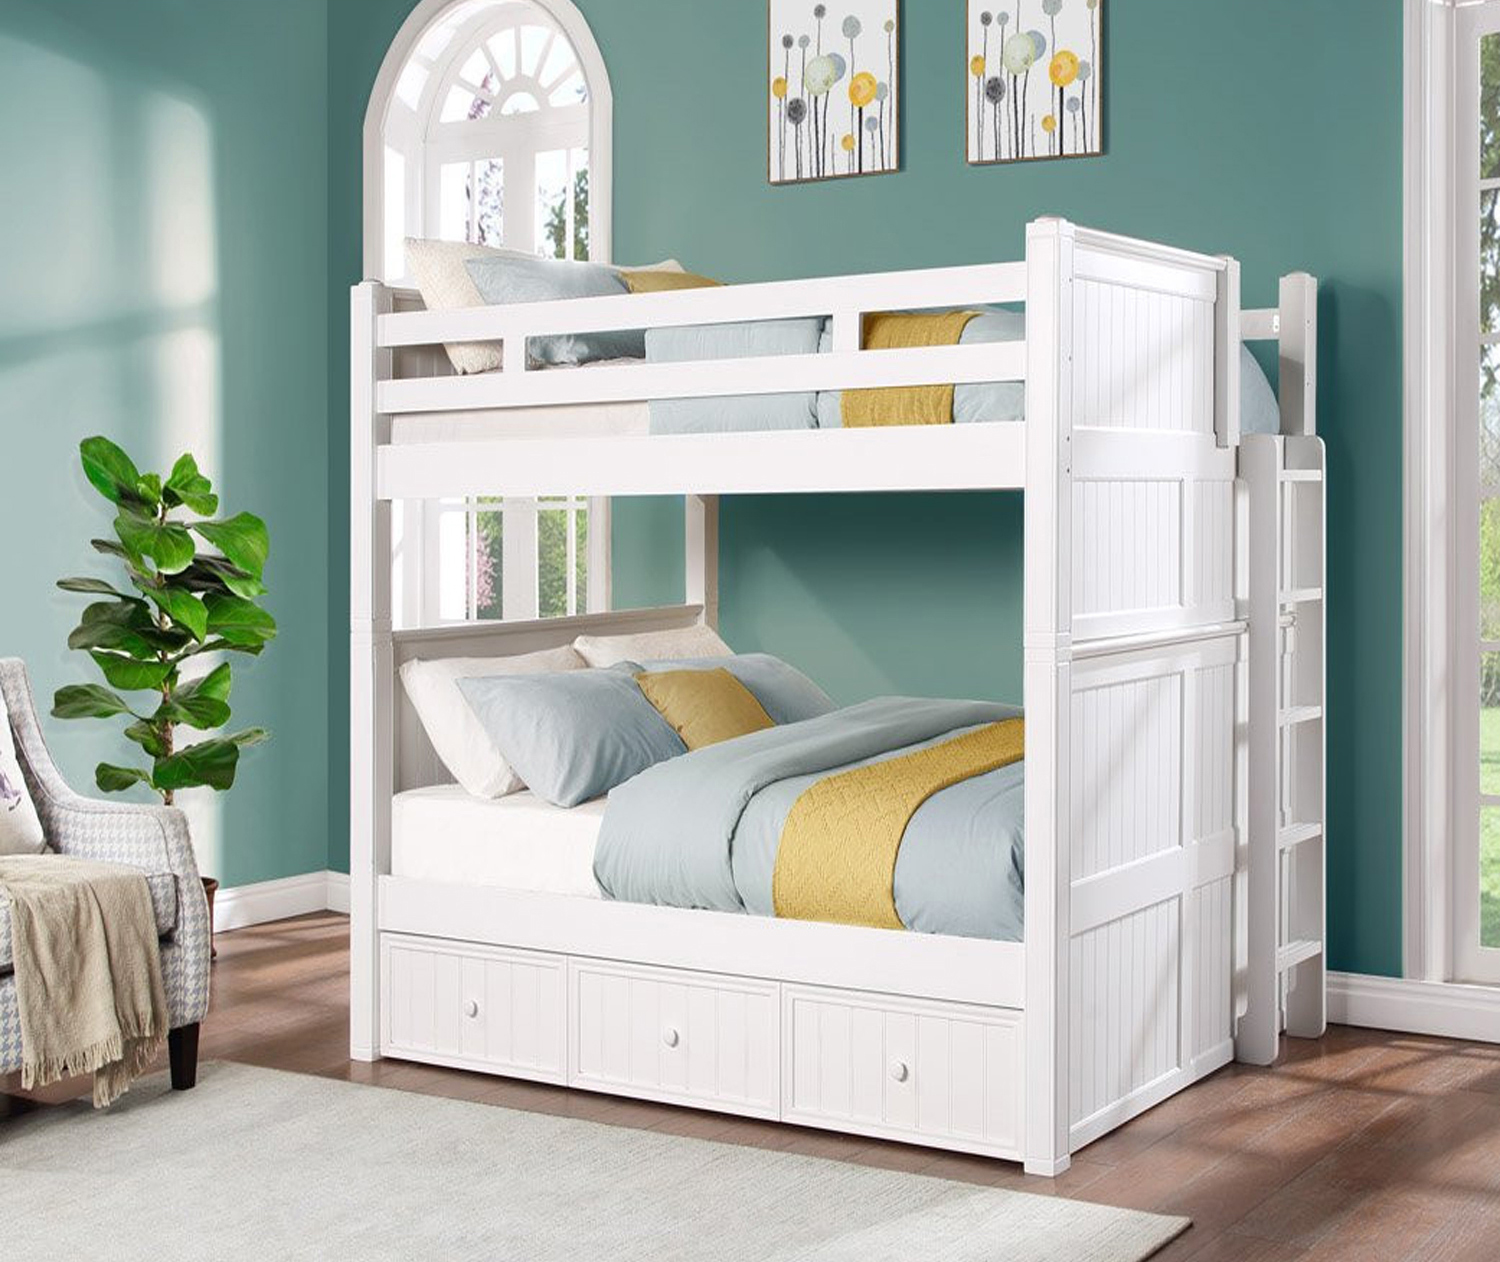 Dill Dual Height Queen Bunk bed